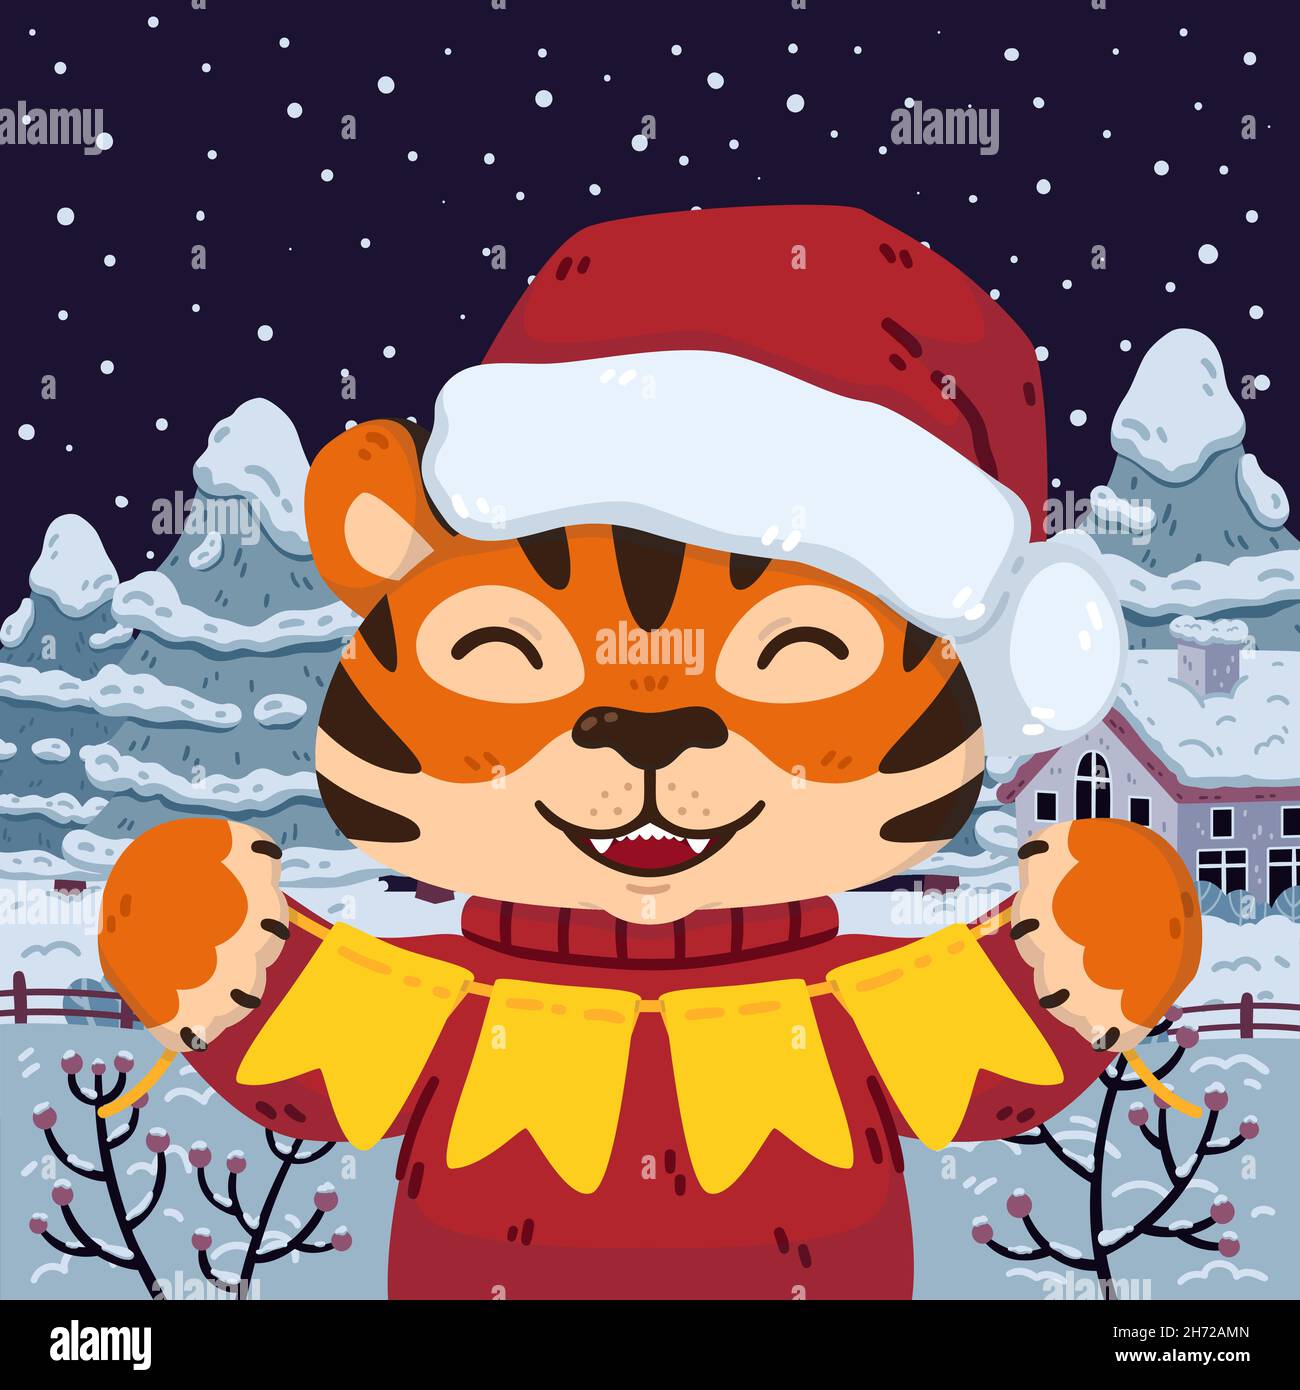 Smiling tiger with santa hat festive garland flags against the backdrop of winter landscape. Chinese zodiac animal. Symbol of the new year 2022 2034. Stock Vector